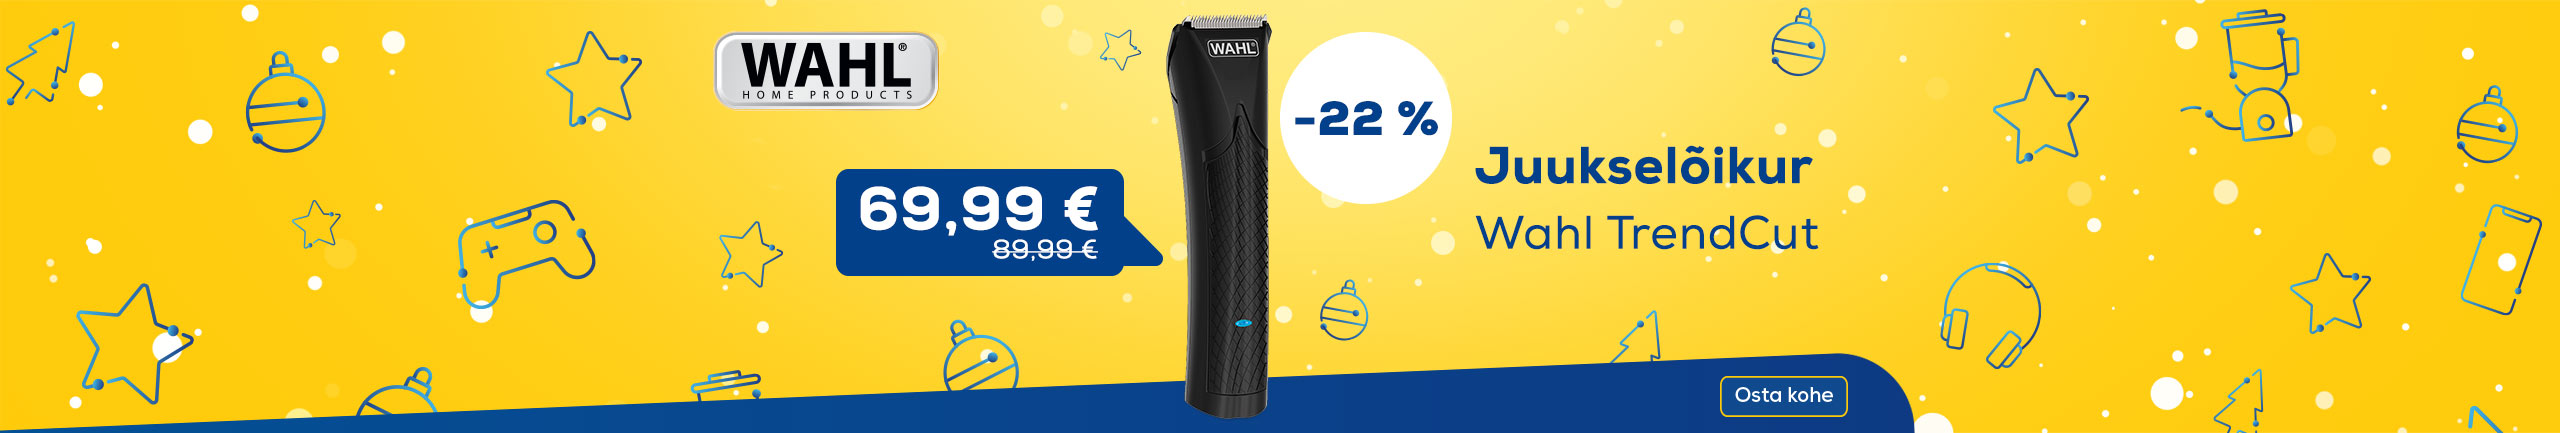 Wahl products now with good prices!